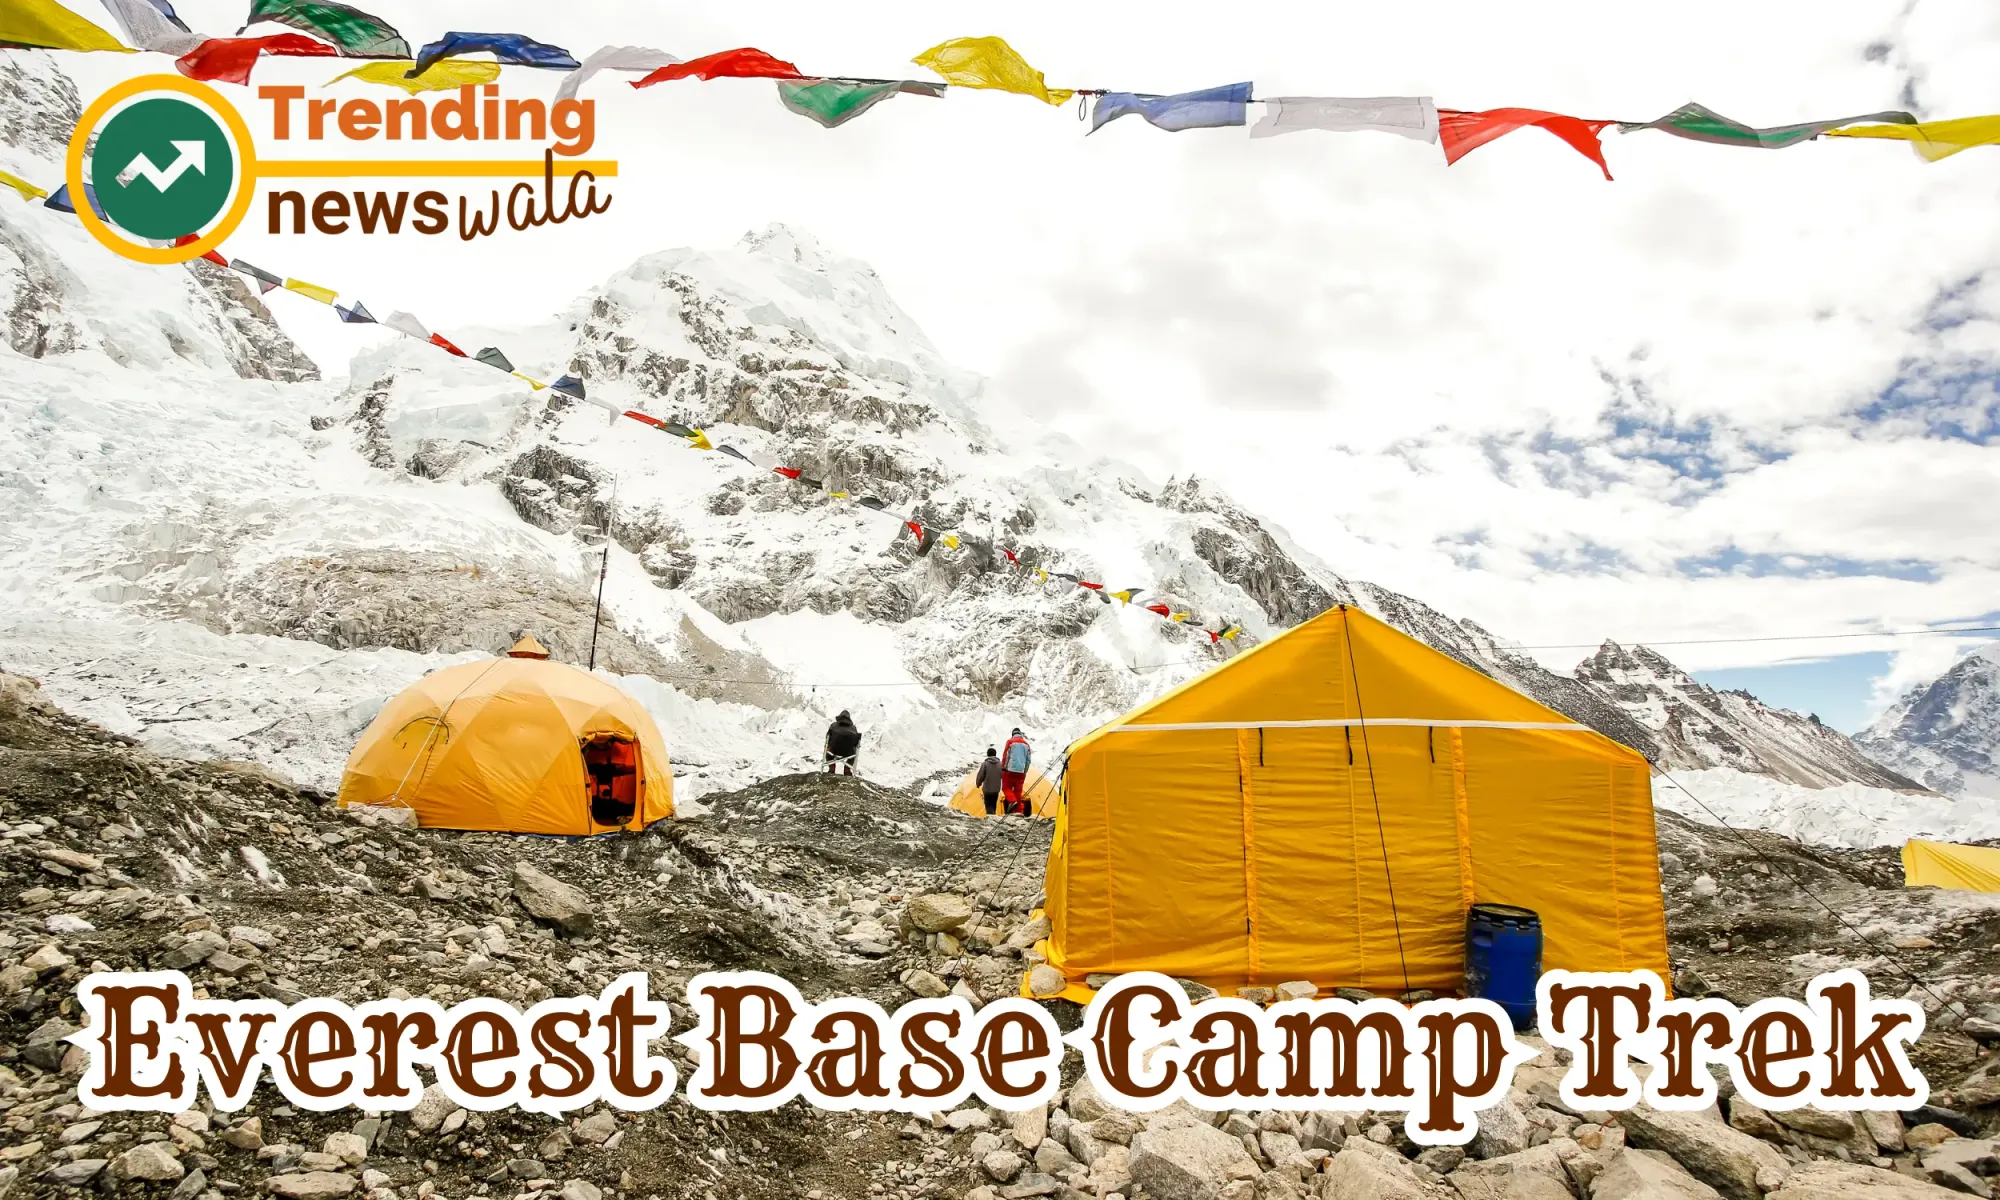 The Everest Base Camp (EBC) Trek is one of the most iconic and sought-after trekking adventures